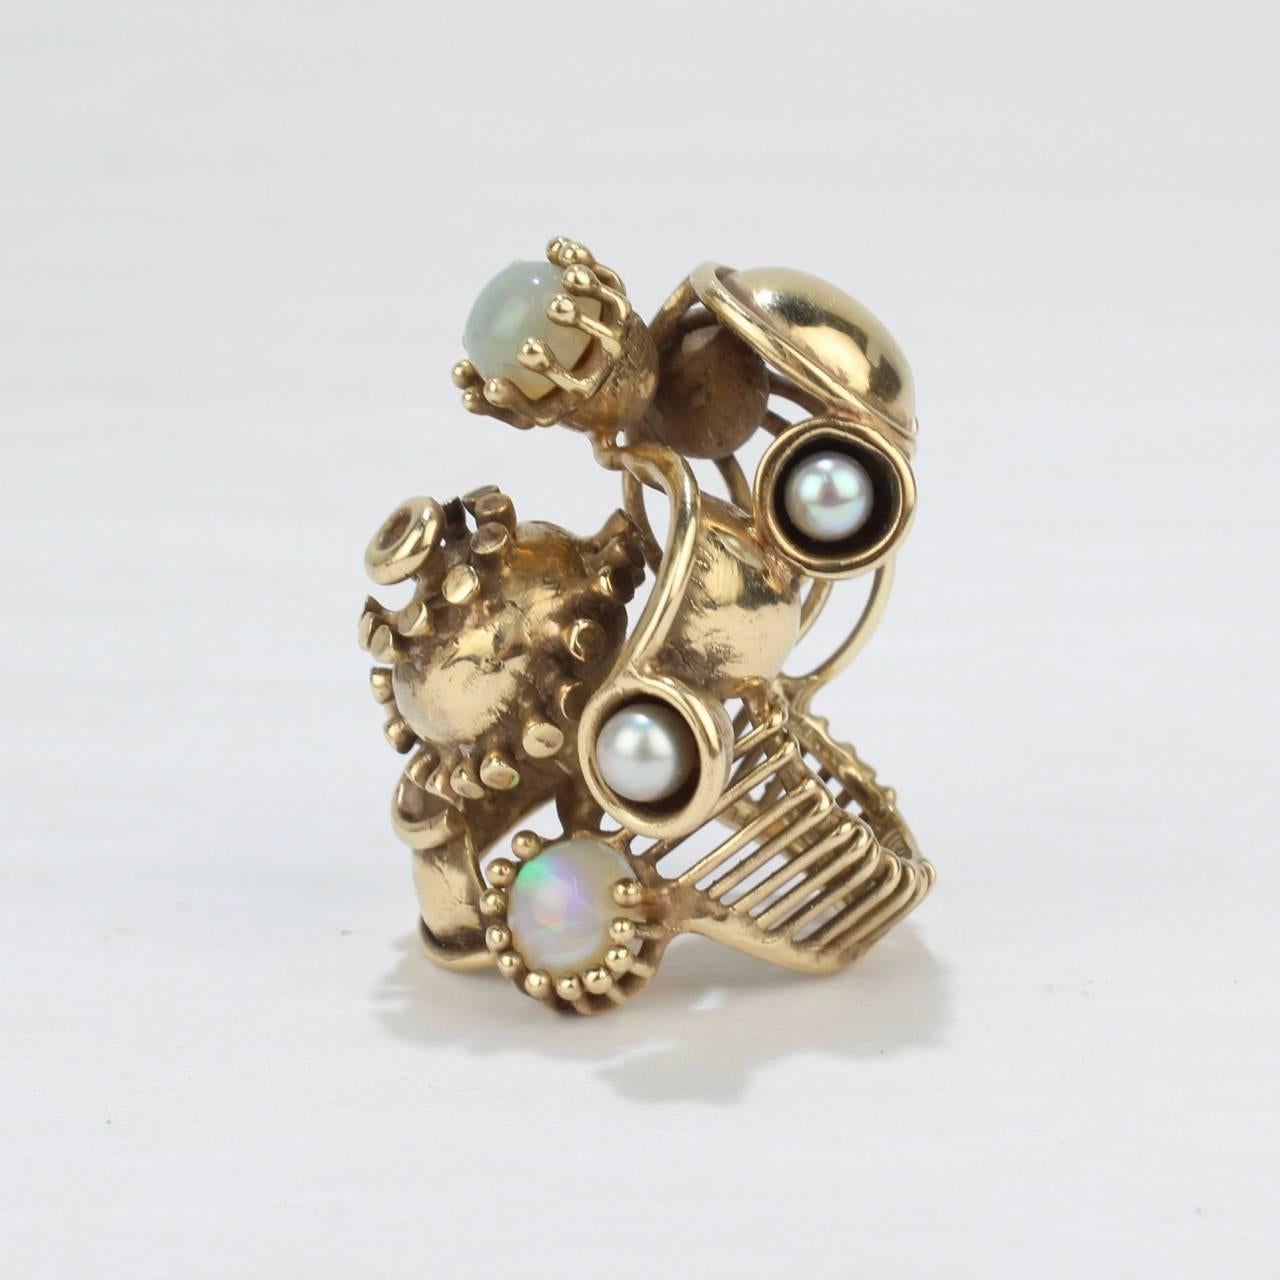 A wild Steam Punk 14 karat ring with pearls and opals by Lee Peck.

Simply a fun ring to wear in a impressively large size!

Lee Barnes Peck was a distinguished Professor of Metal & Jewelry at Northern Illinois for decades. His work is held in